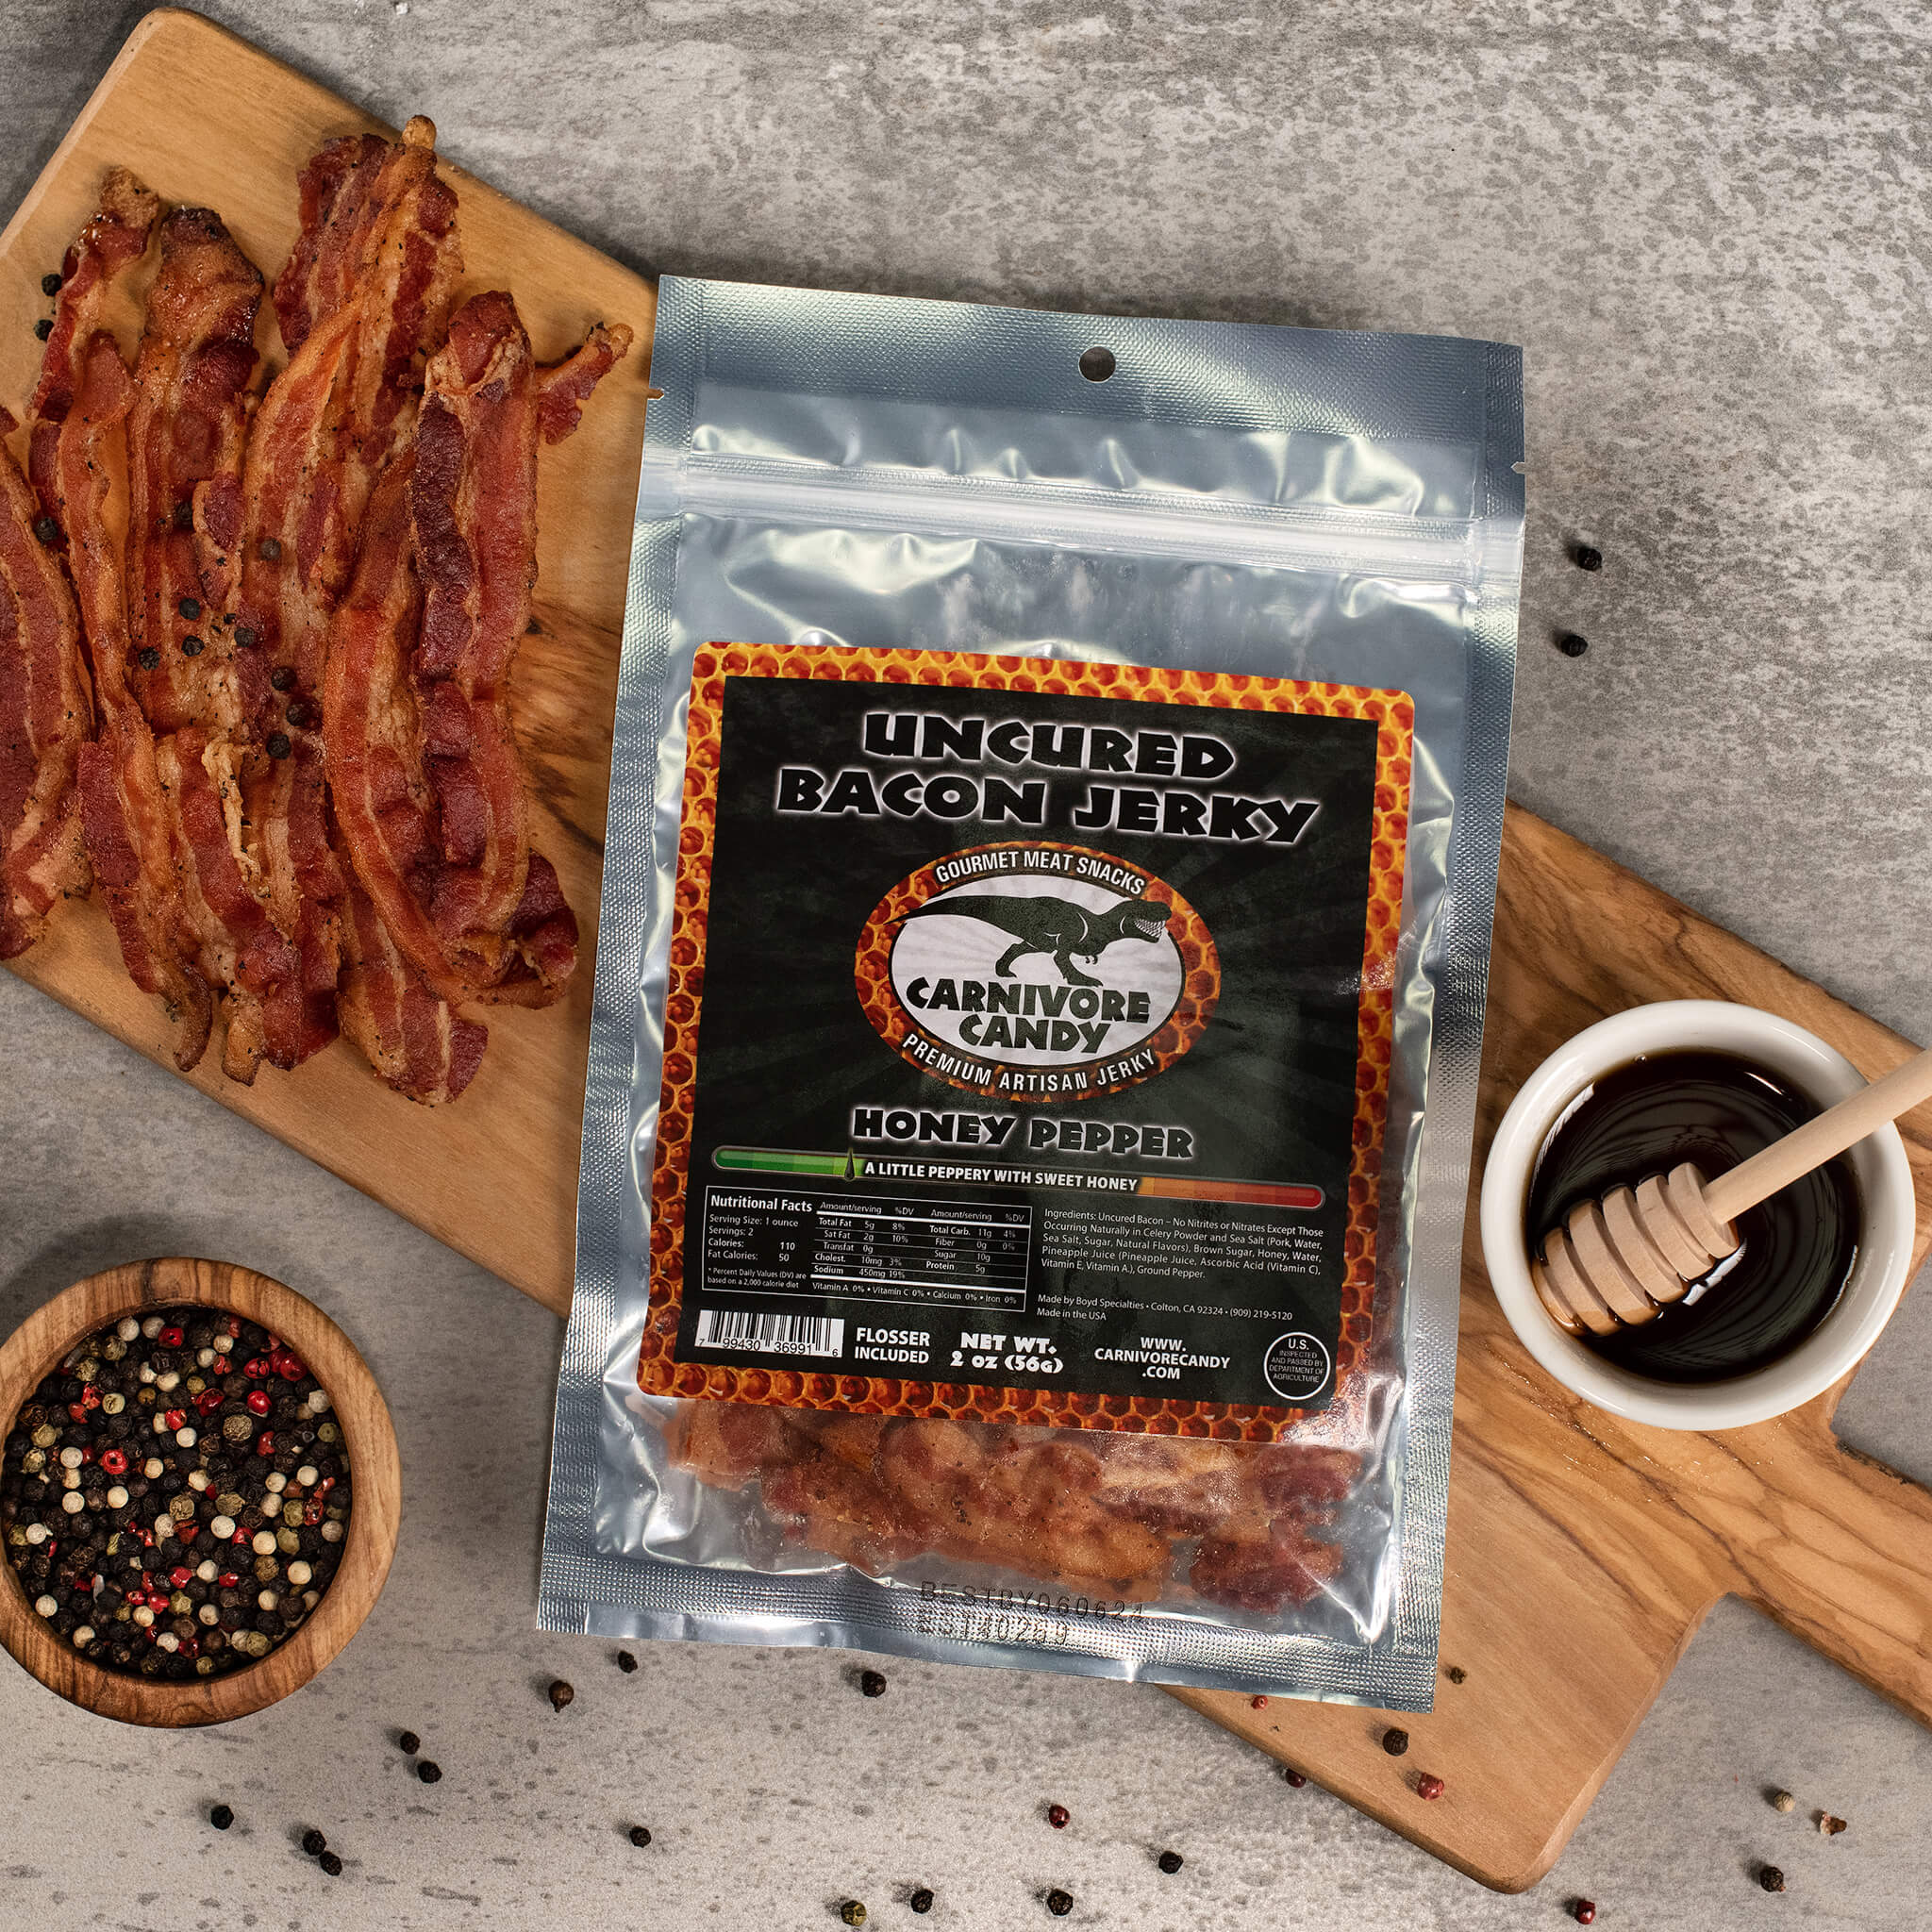 Bacon Crate Includes 5 Awesome Bacon-Flavored Snacks Like Maple Bacon  Jerky, Bacon Seasoning and More Great Gifts for Men